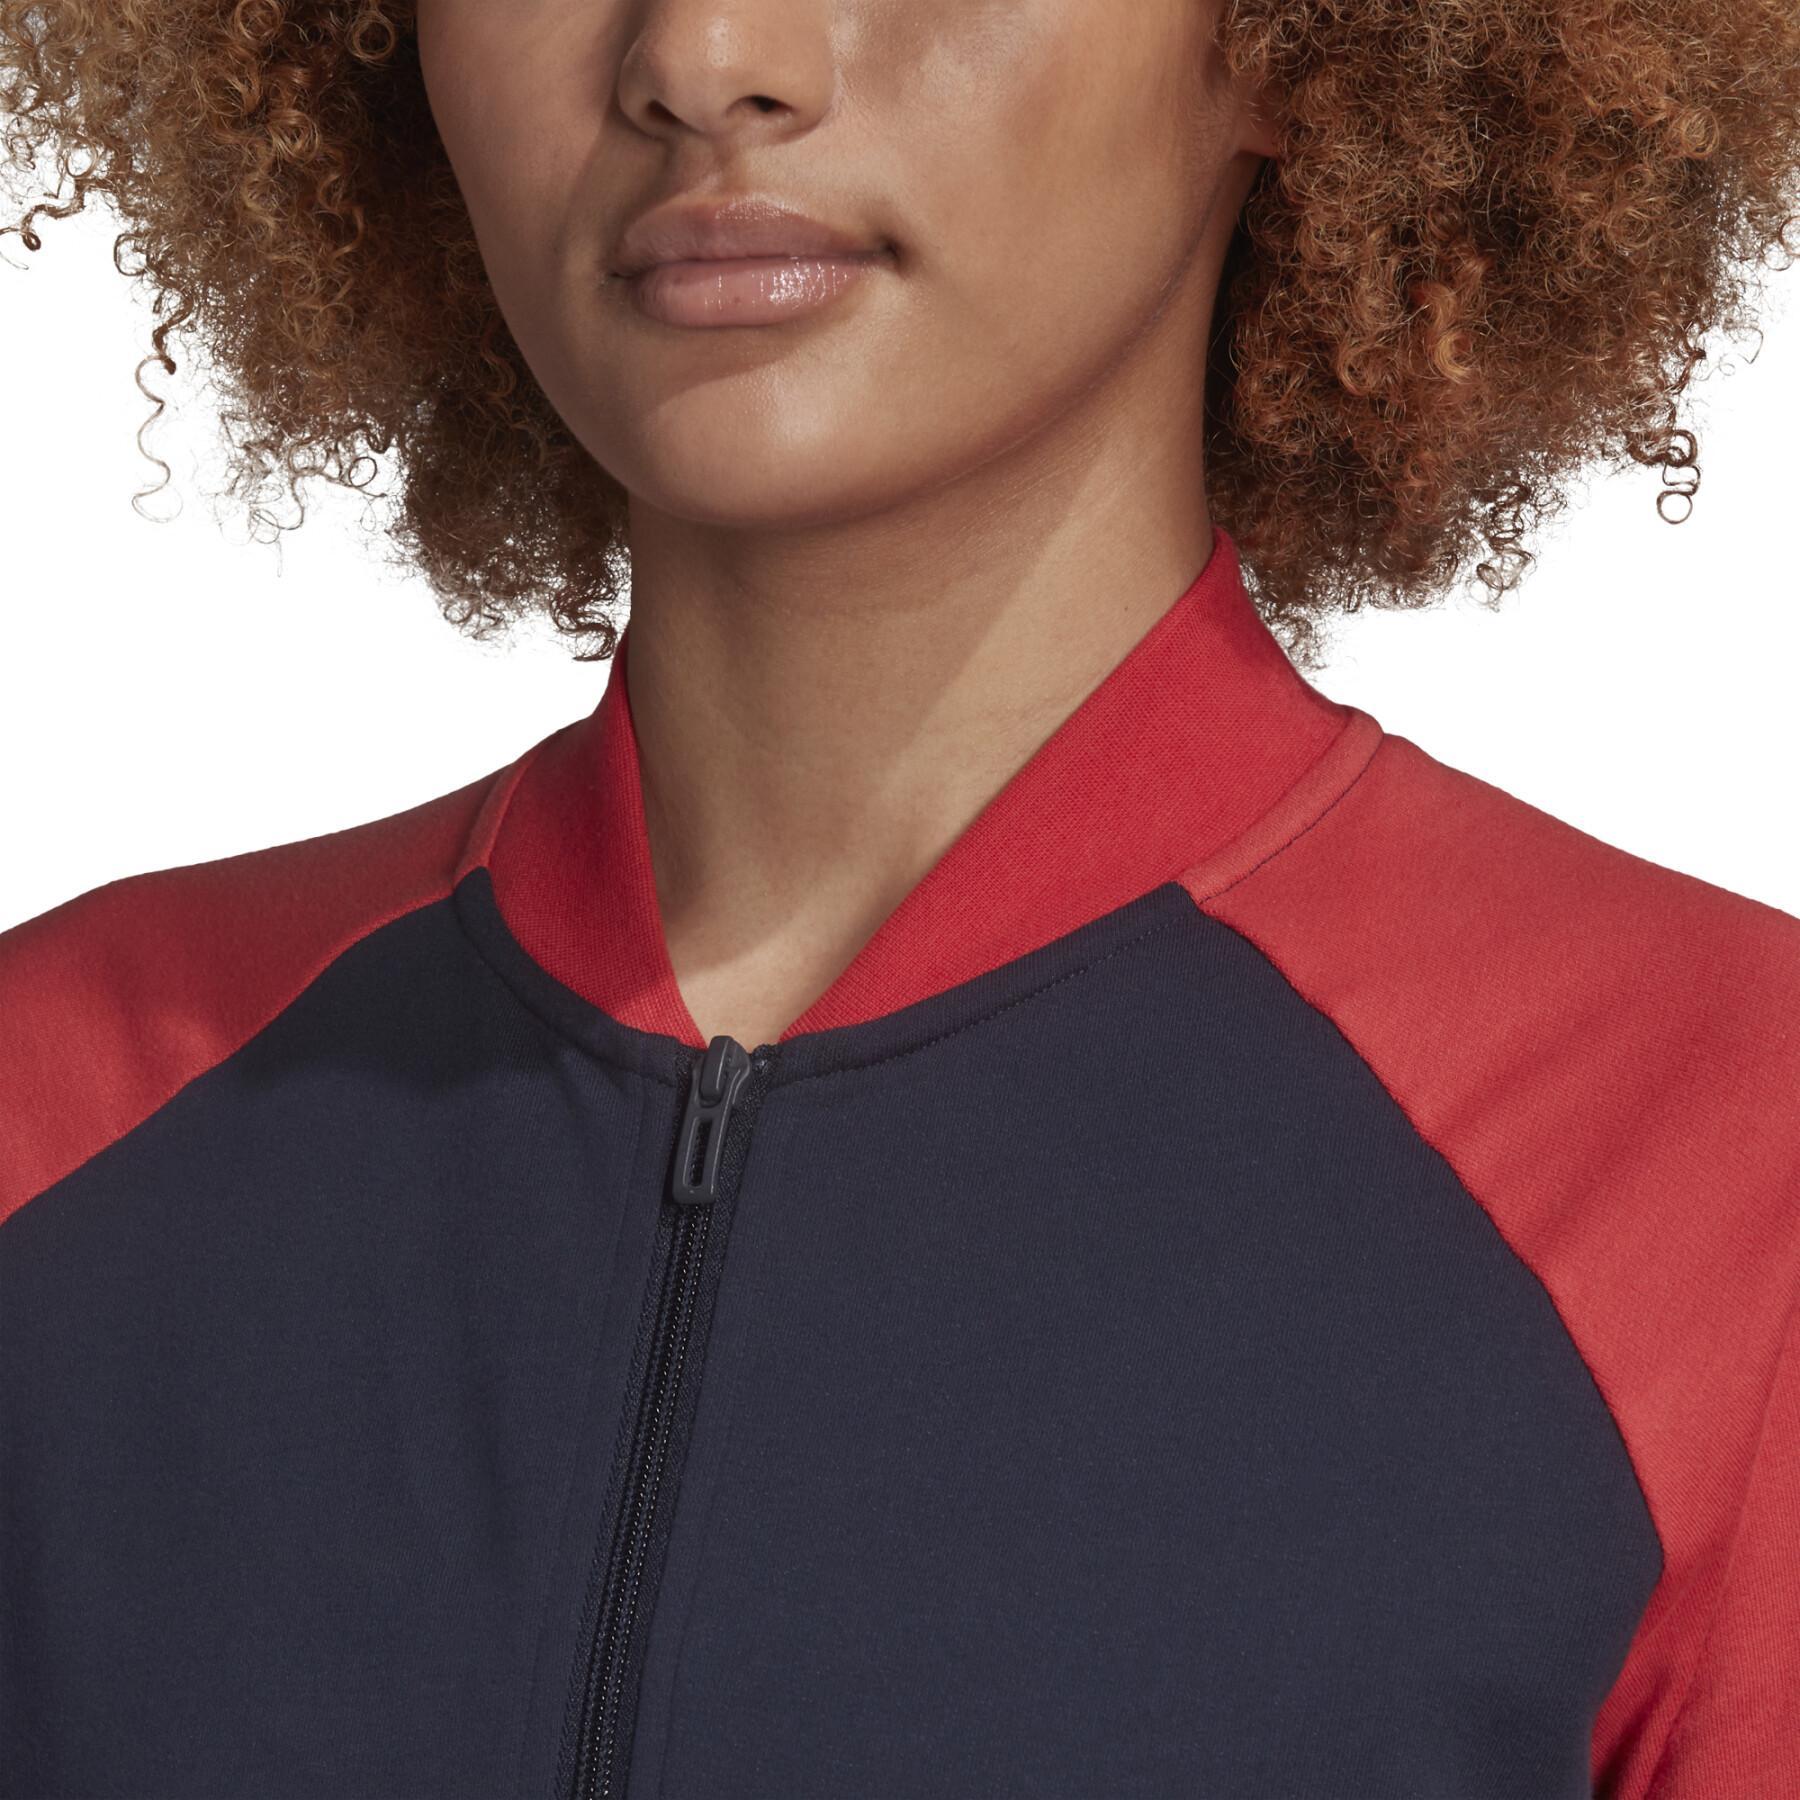 Tracksuit woman adidas Core Athletic